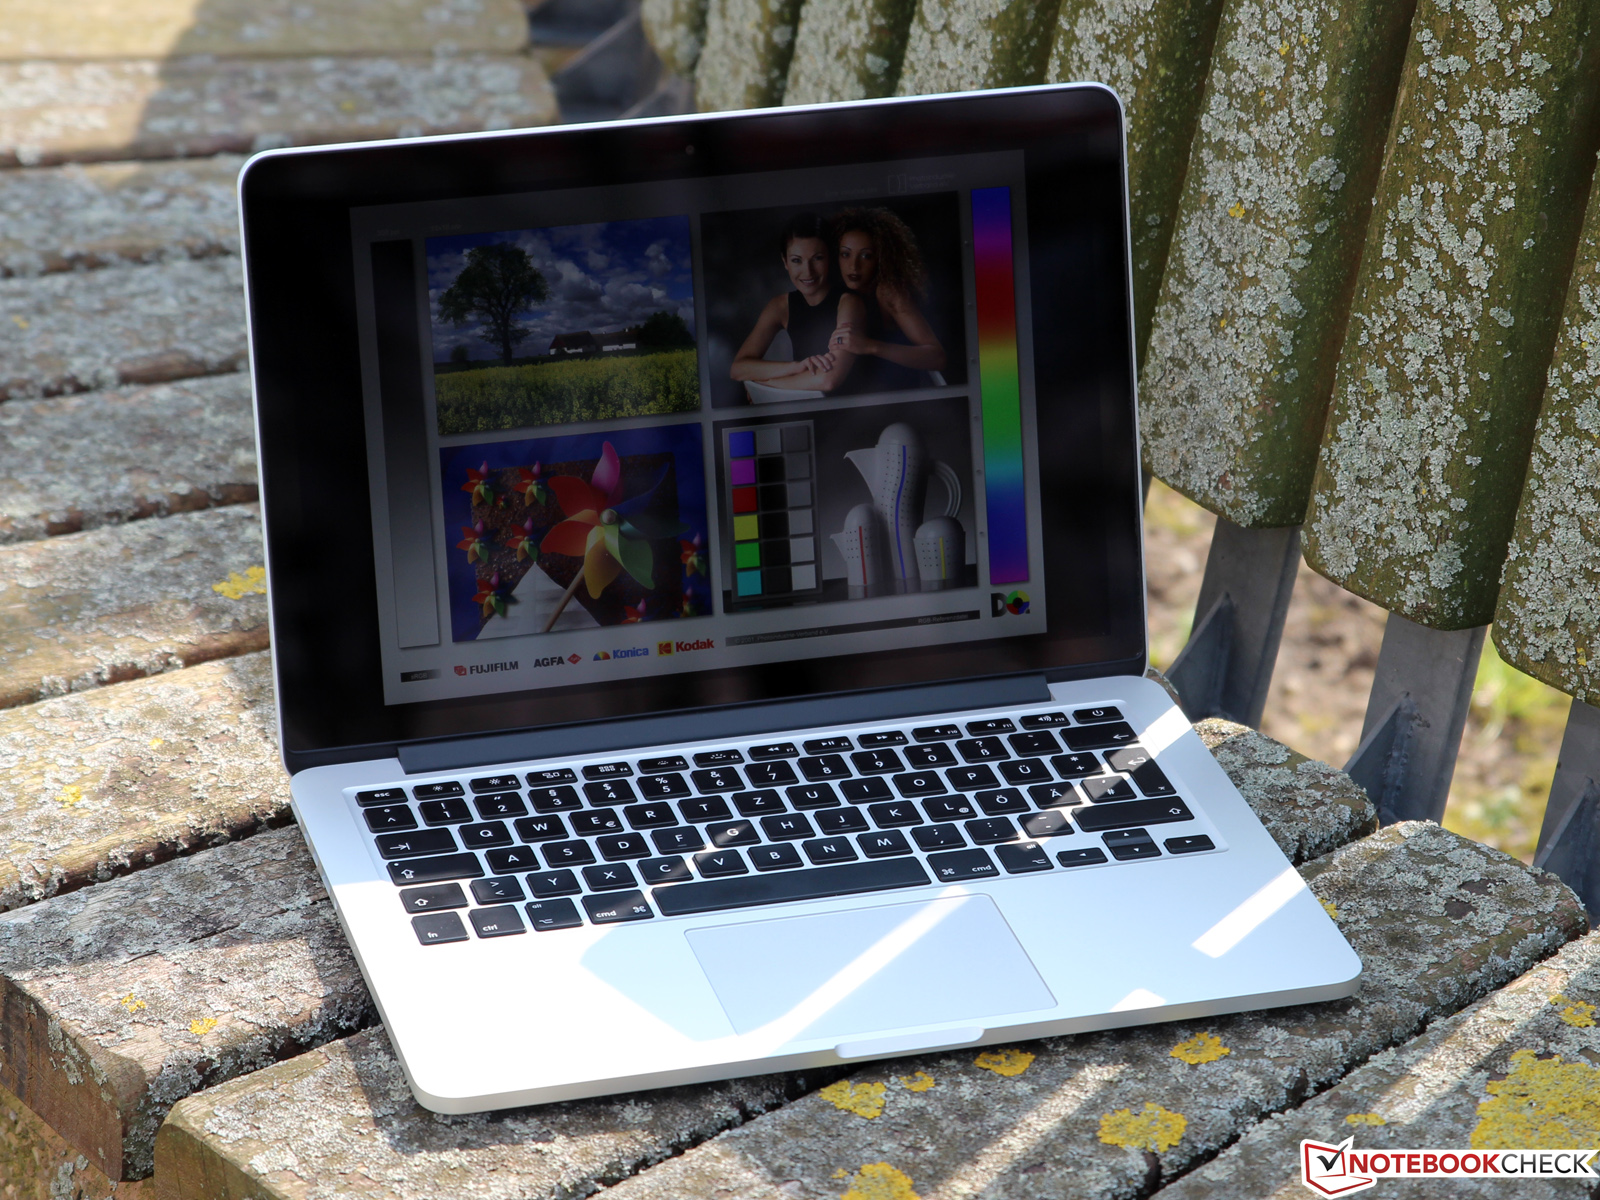 recommended settings for 2015 macbook pro 13 inch sc2